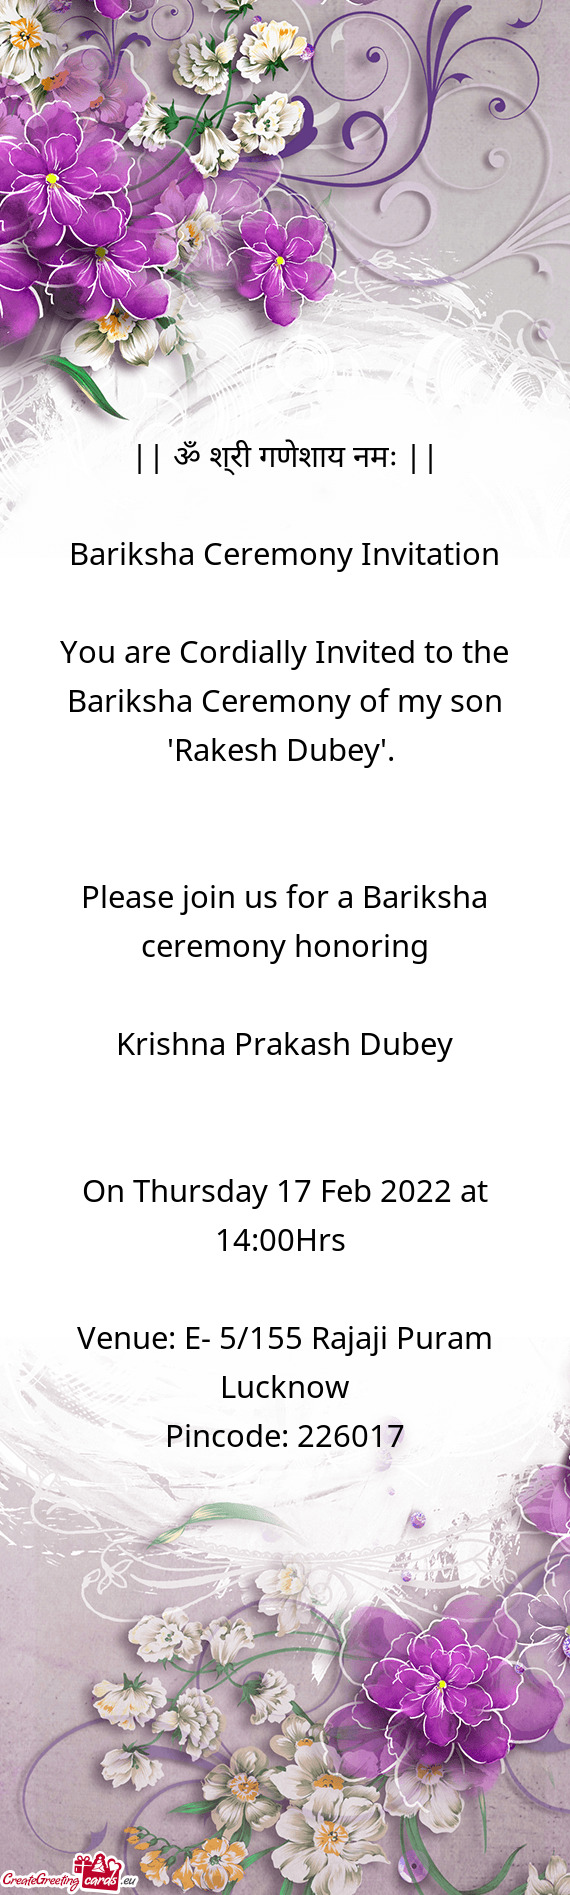 You are Cordially Invited to the Bariksha Ceremony of my son "Rakesh Dubey"